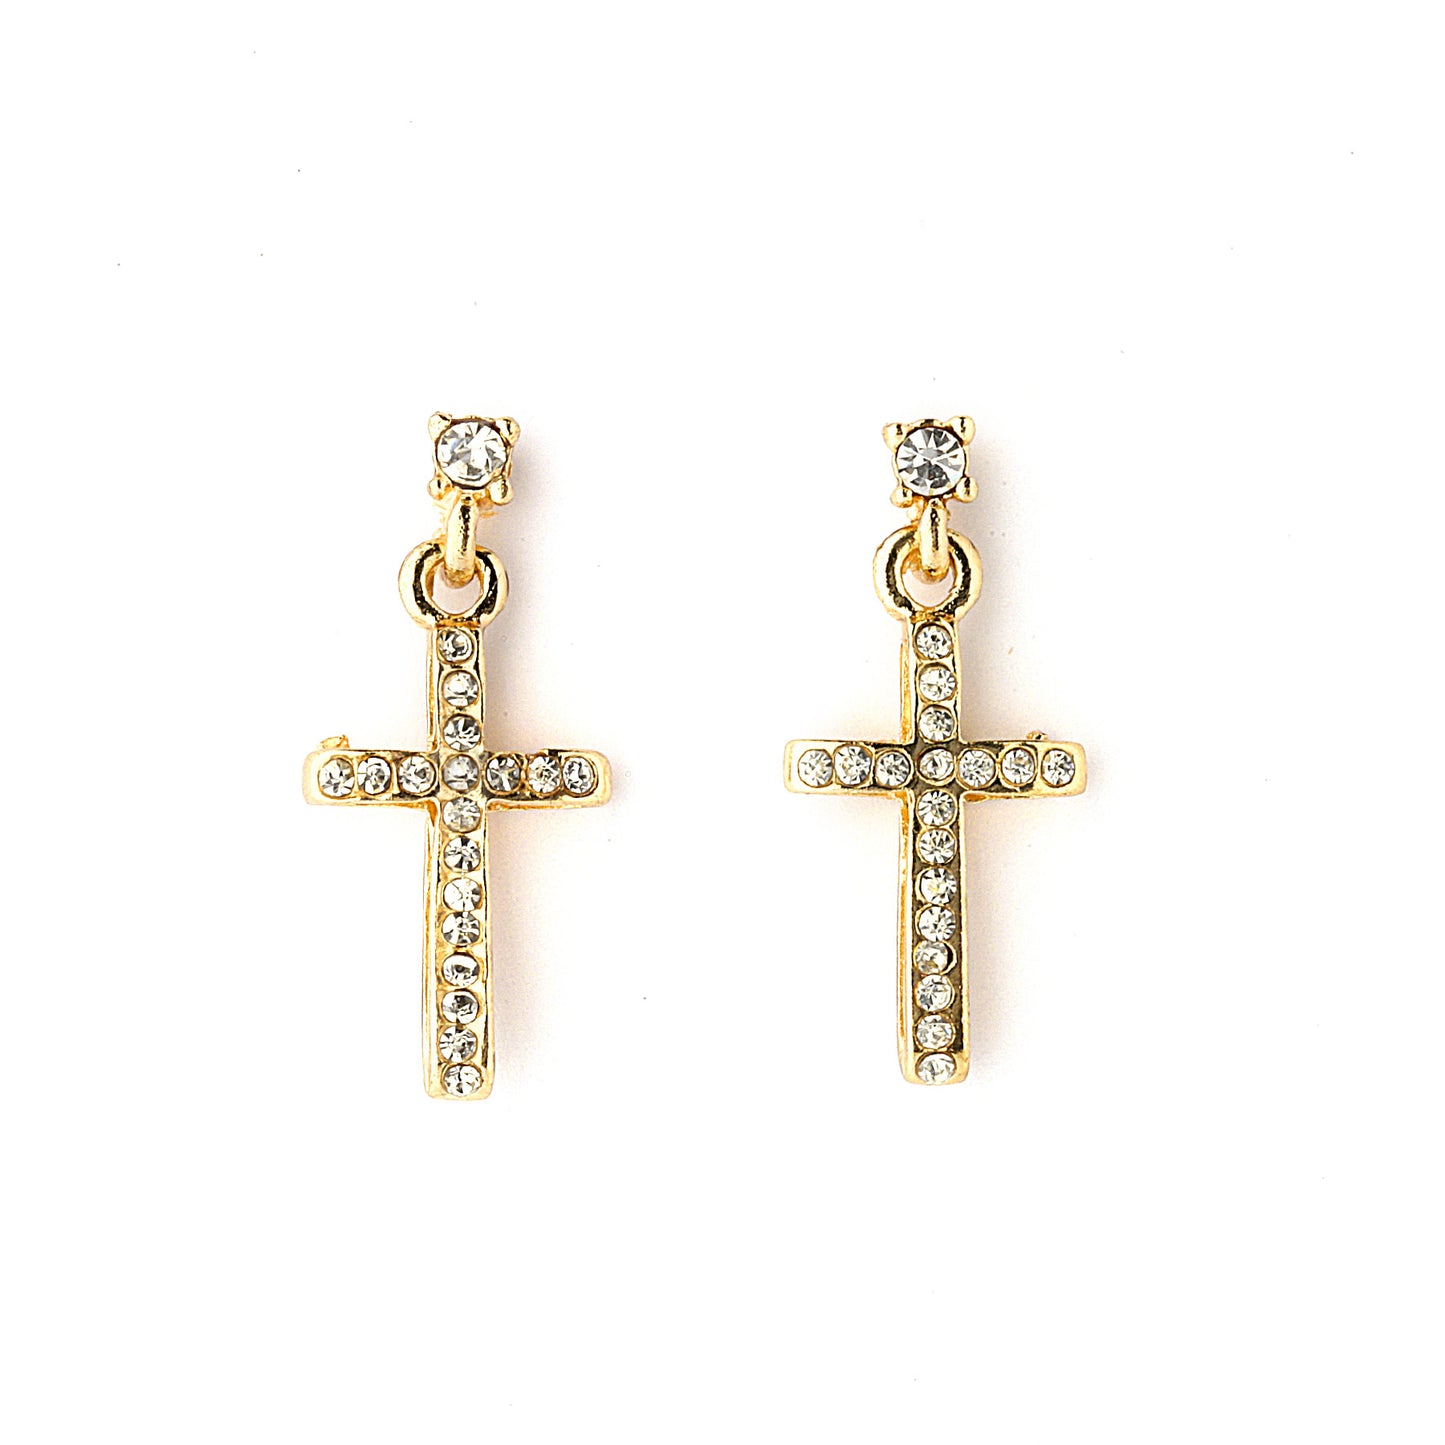 Pave CZ Cross Earrings - 14-kt Gold Filled